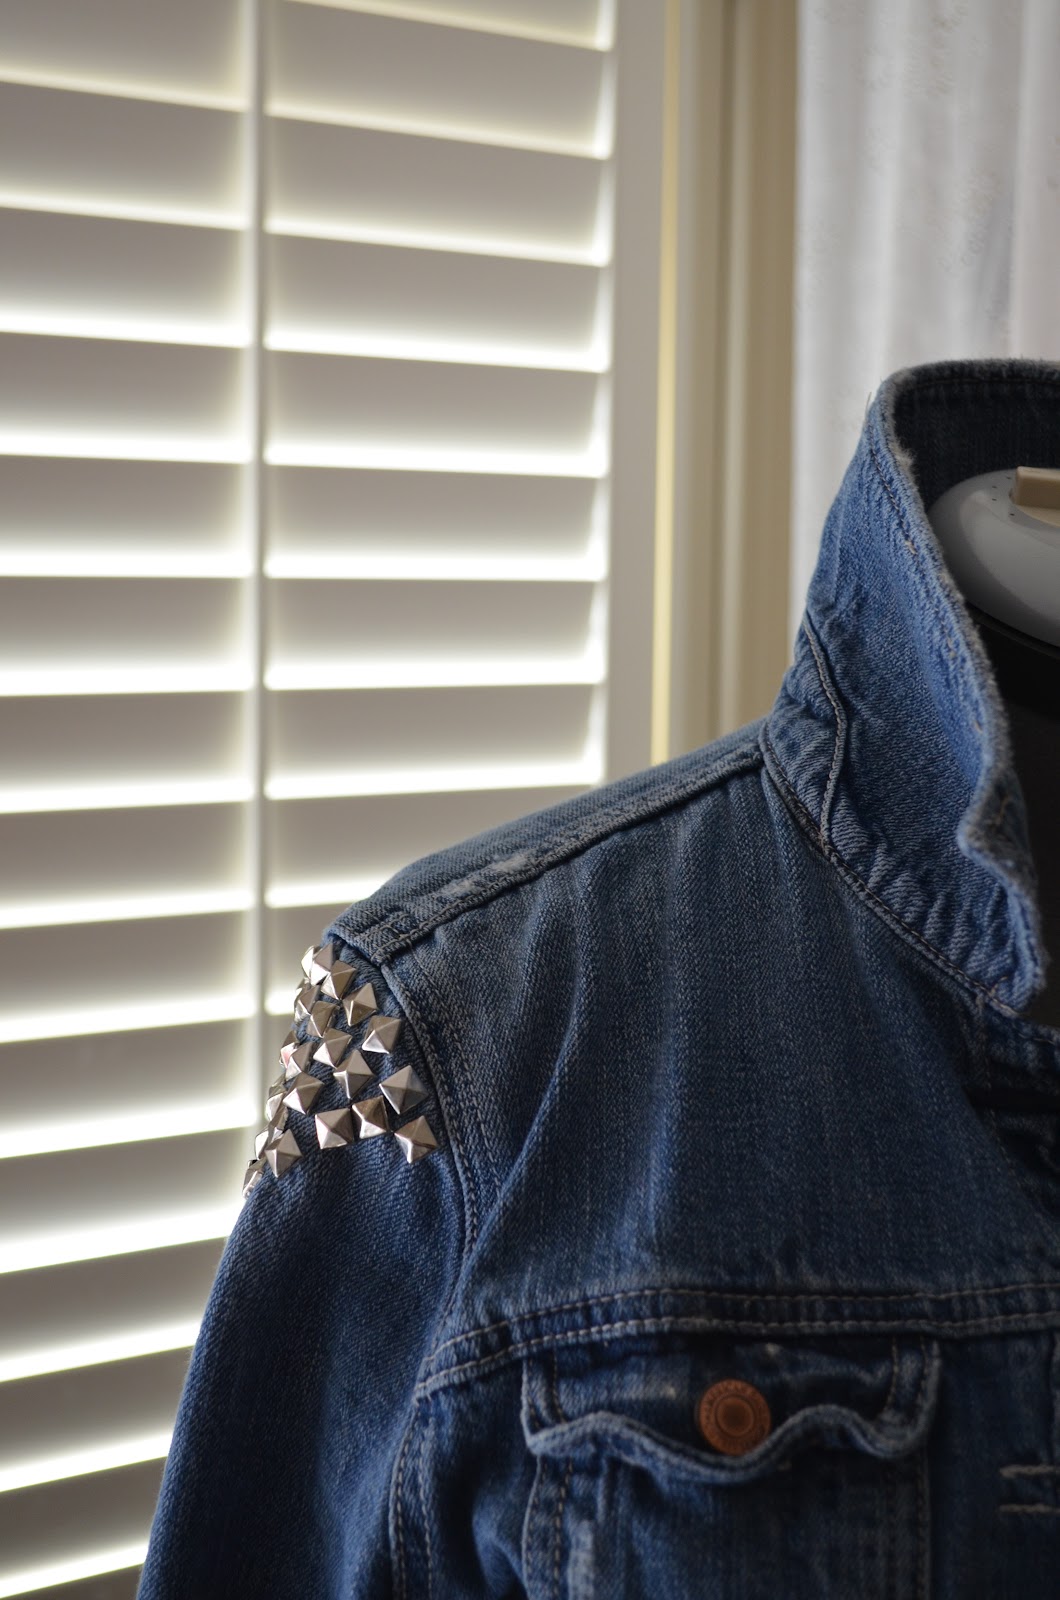 Therapy. Everyone needs some.: DIY Studded Denim Jacket